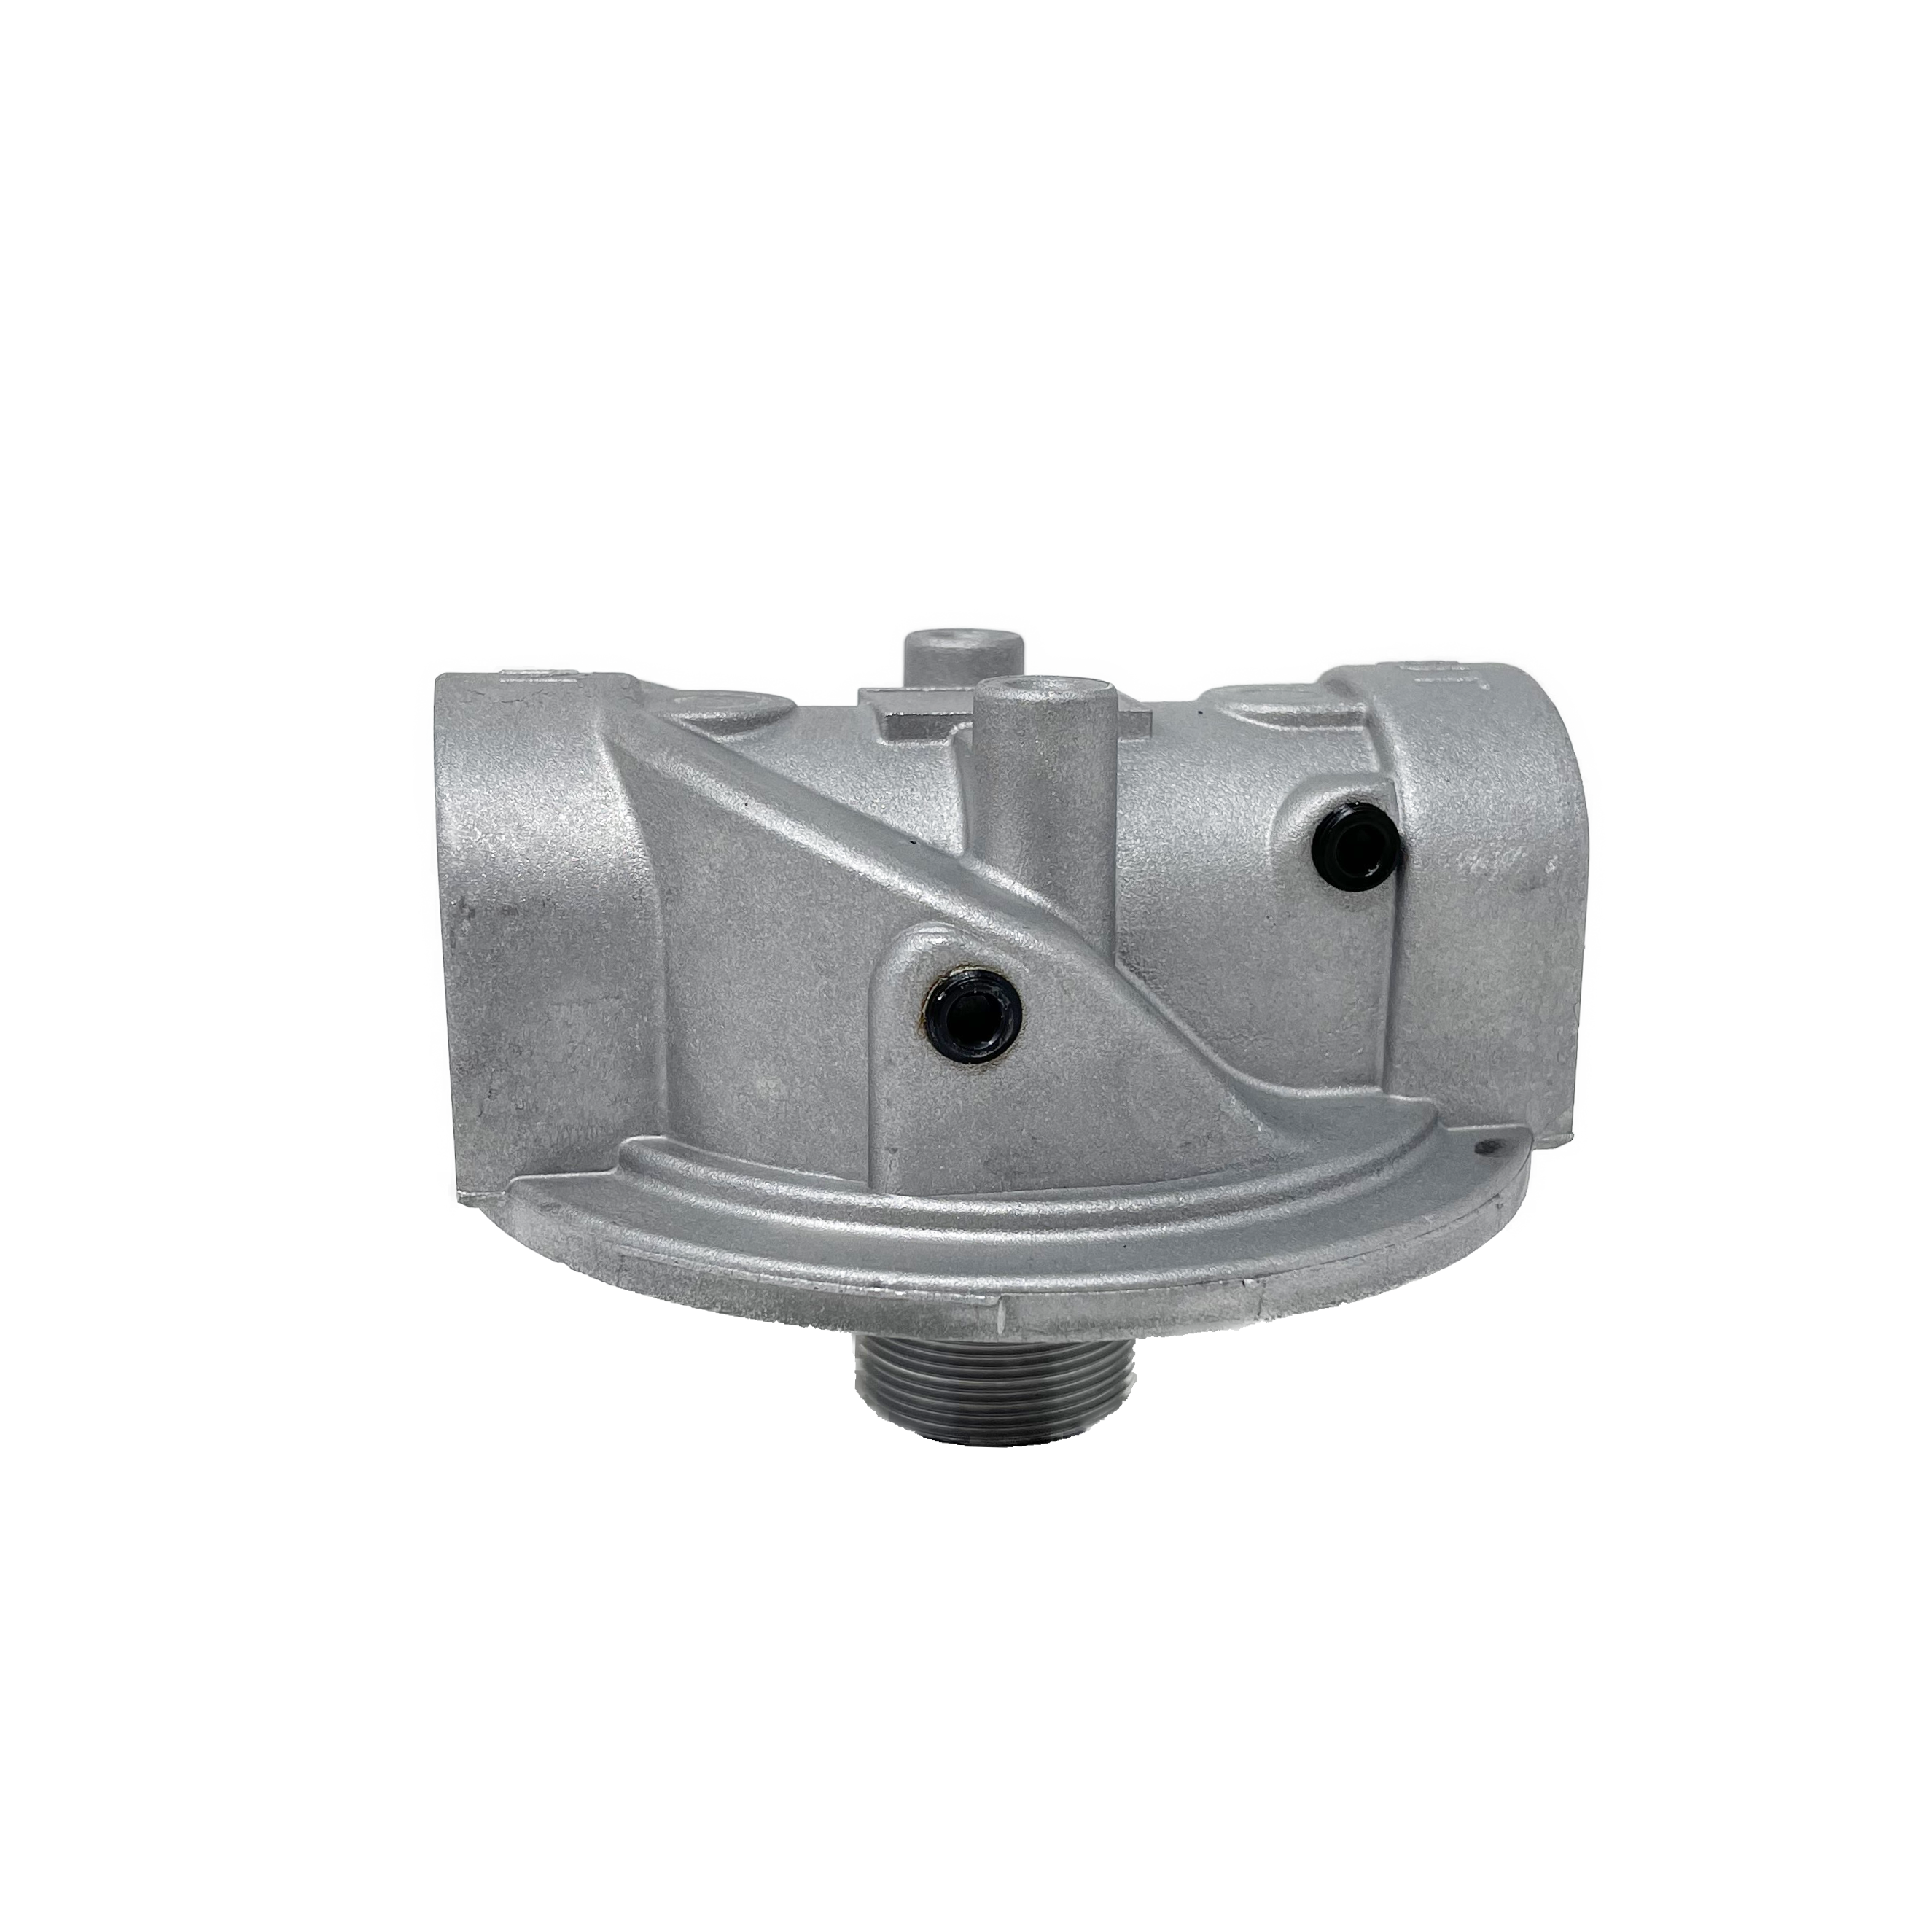 SSF-130-B1.7-1 : Stauff SSF Spin-On Filter Head, 60 GPM, 174psi, #16 SAE (1"), with Bypass, Clogging indicator port drilled for return